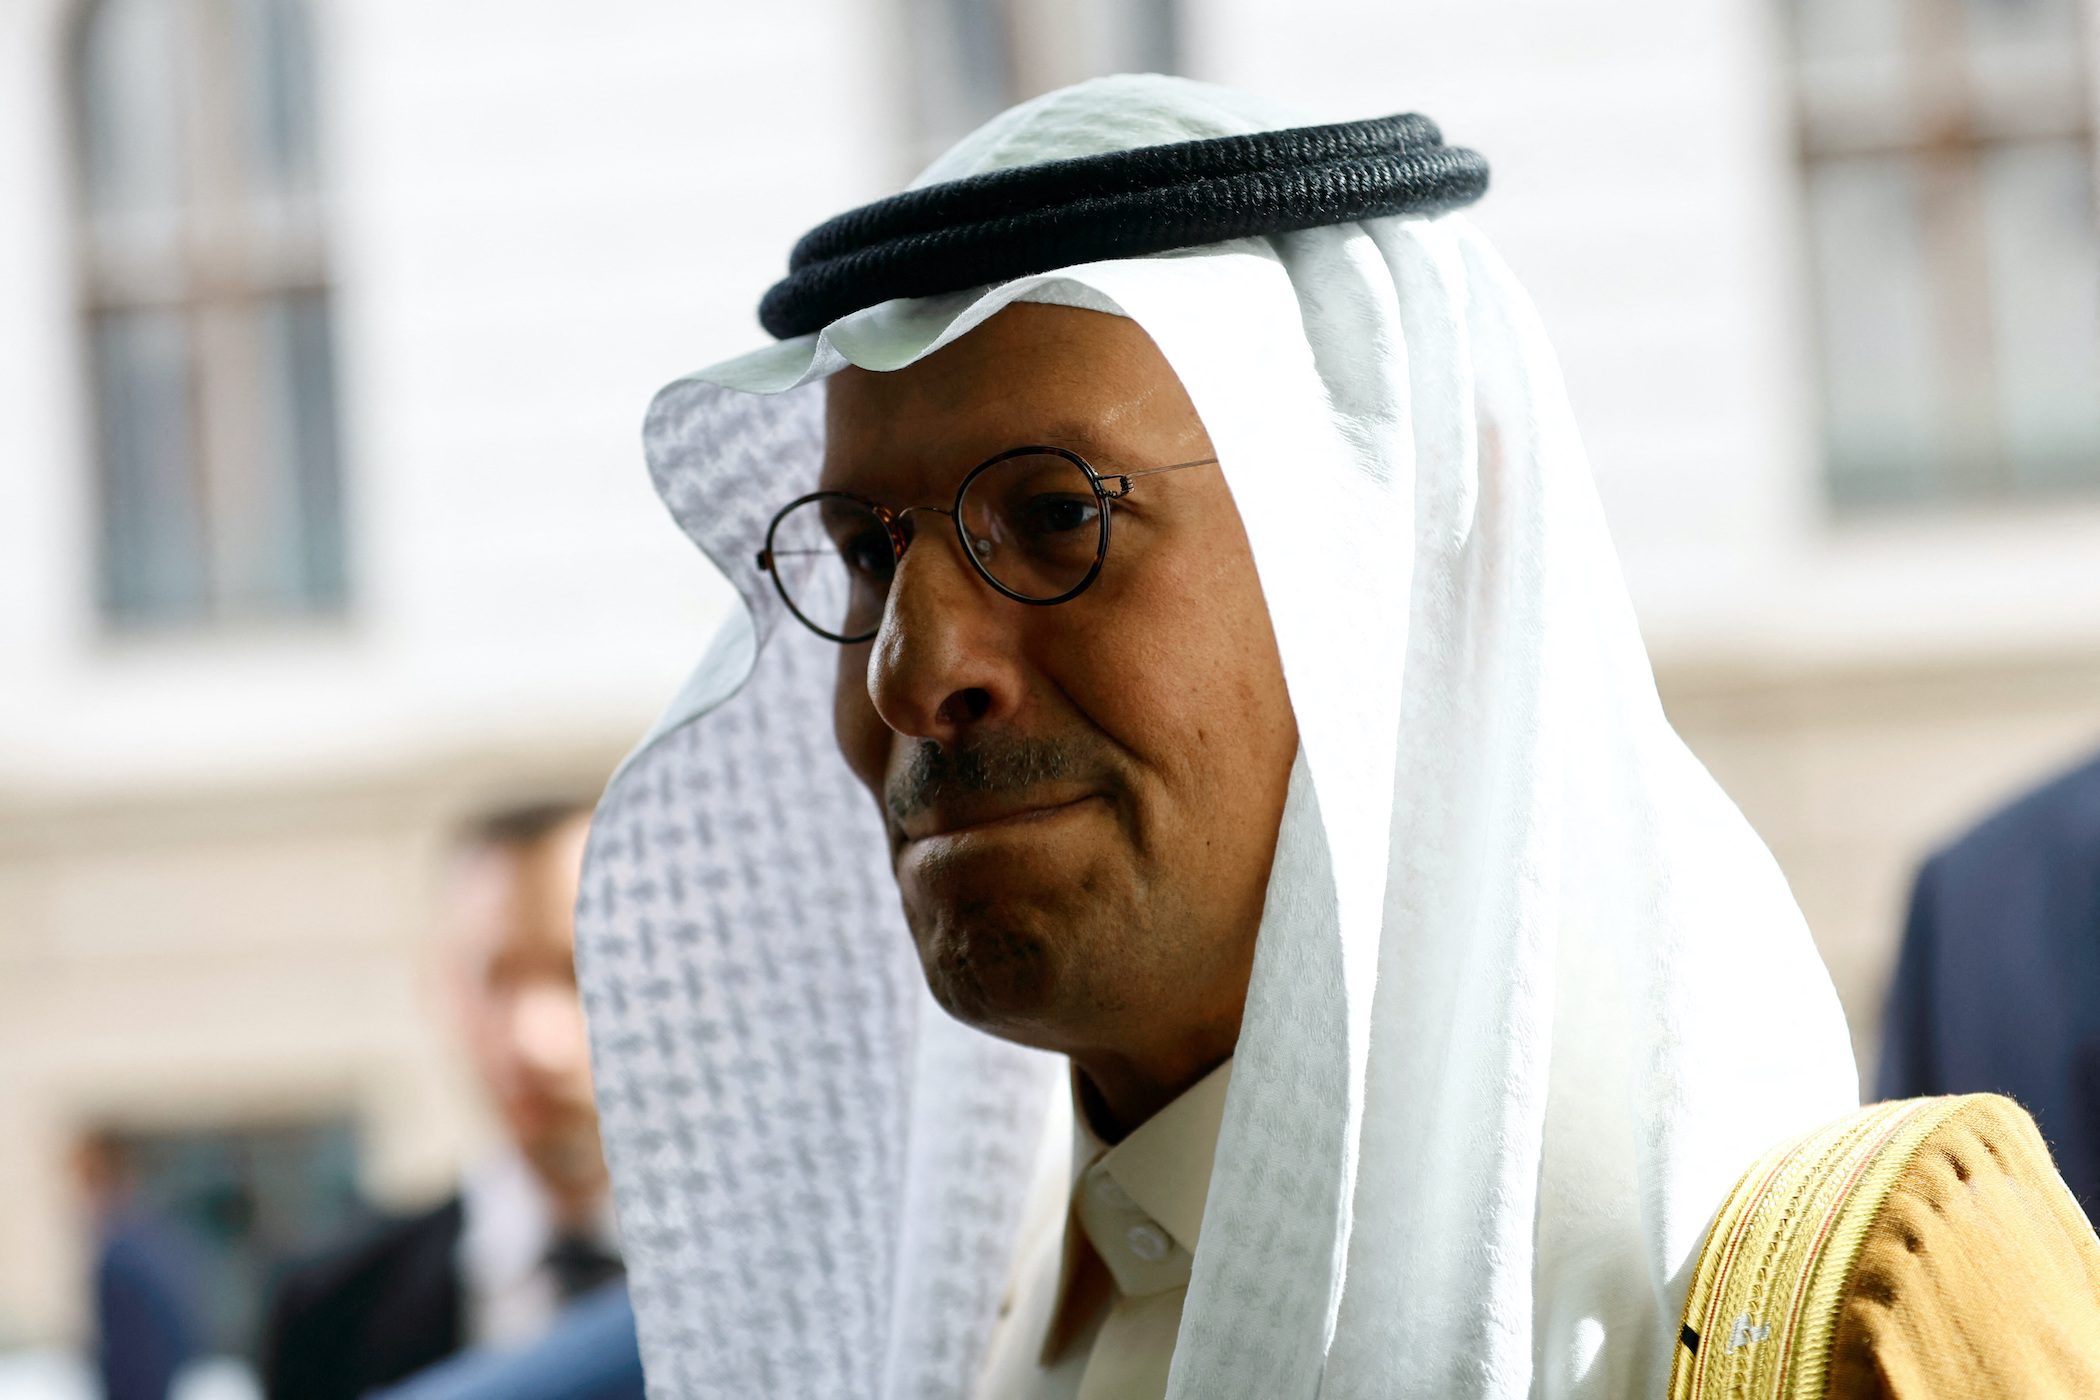 OPEC+ members endorse output cut after US coercion accusation